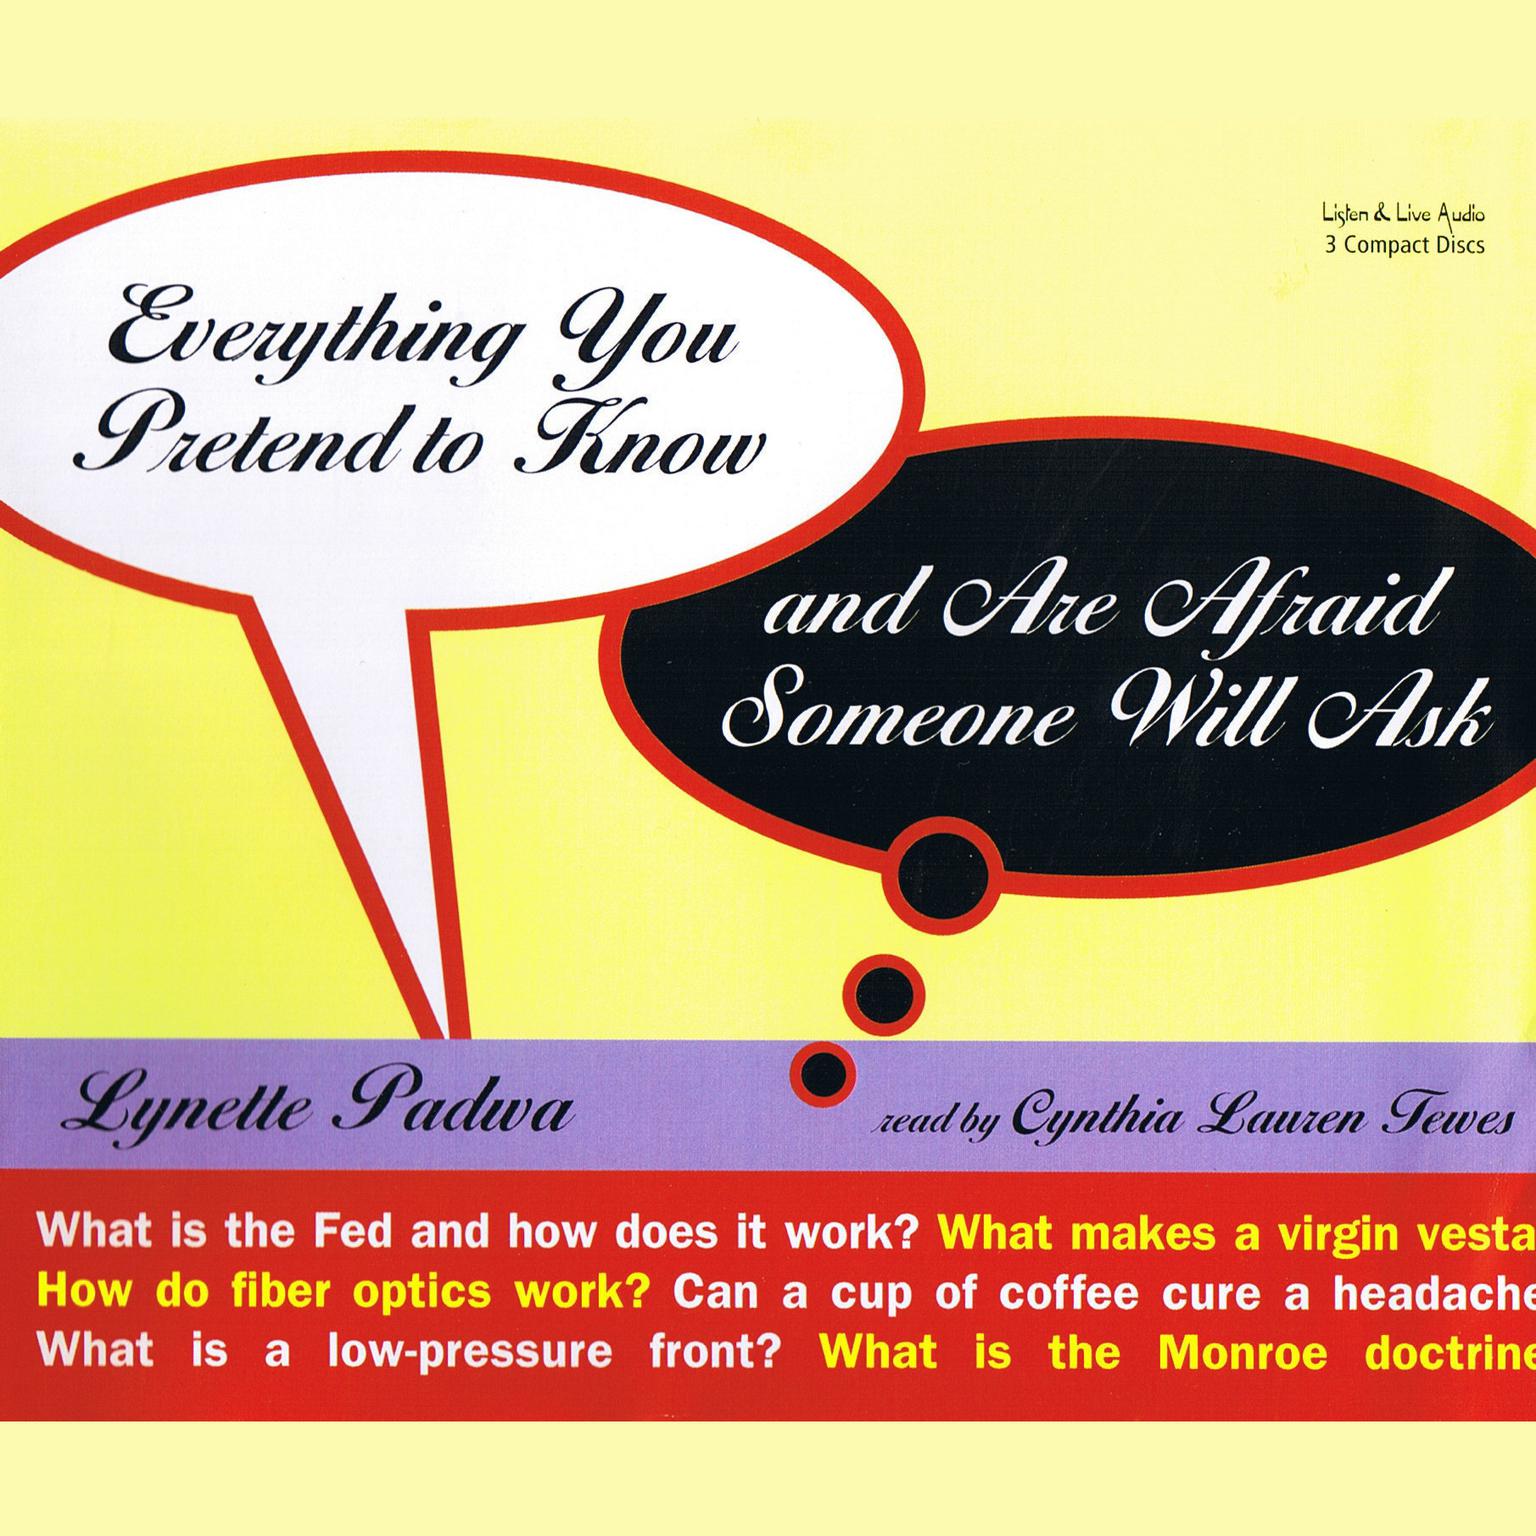 Everything You Pretend To Know And Are Afraid Someone Will Ask (Abridged) Audiobook, by Lynette Padwa